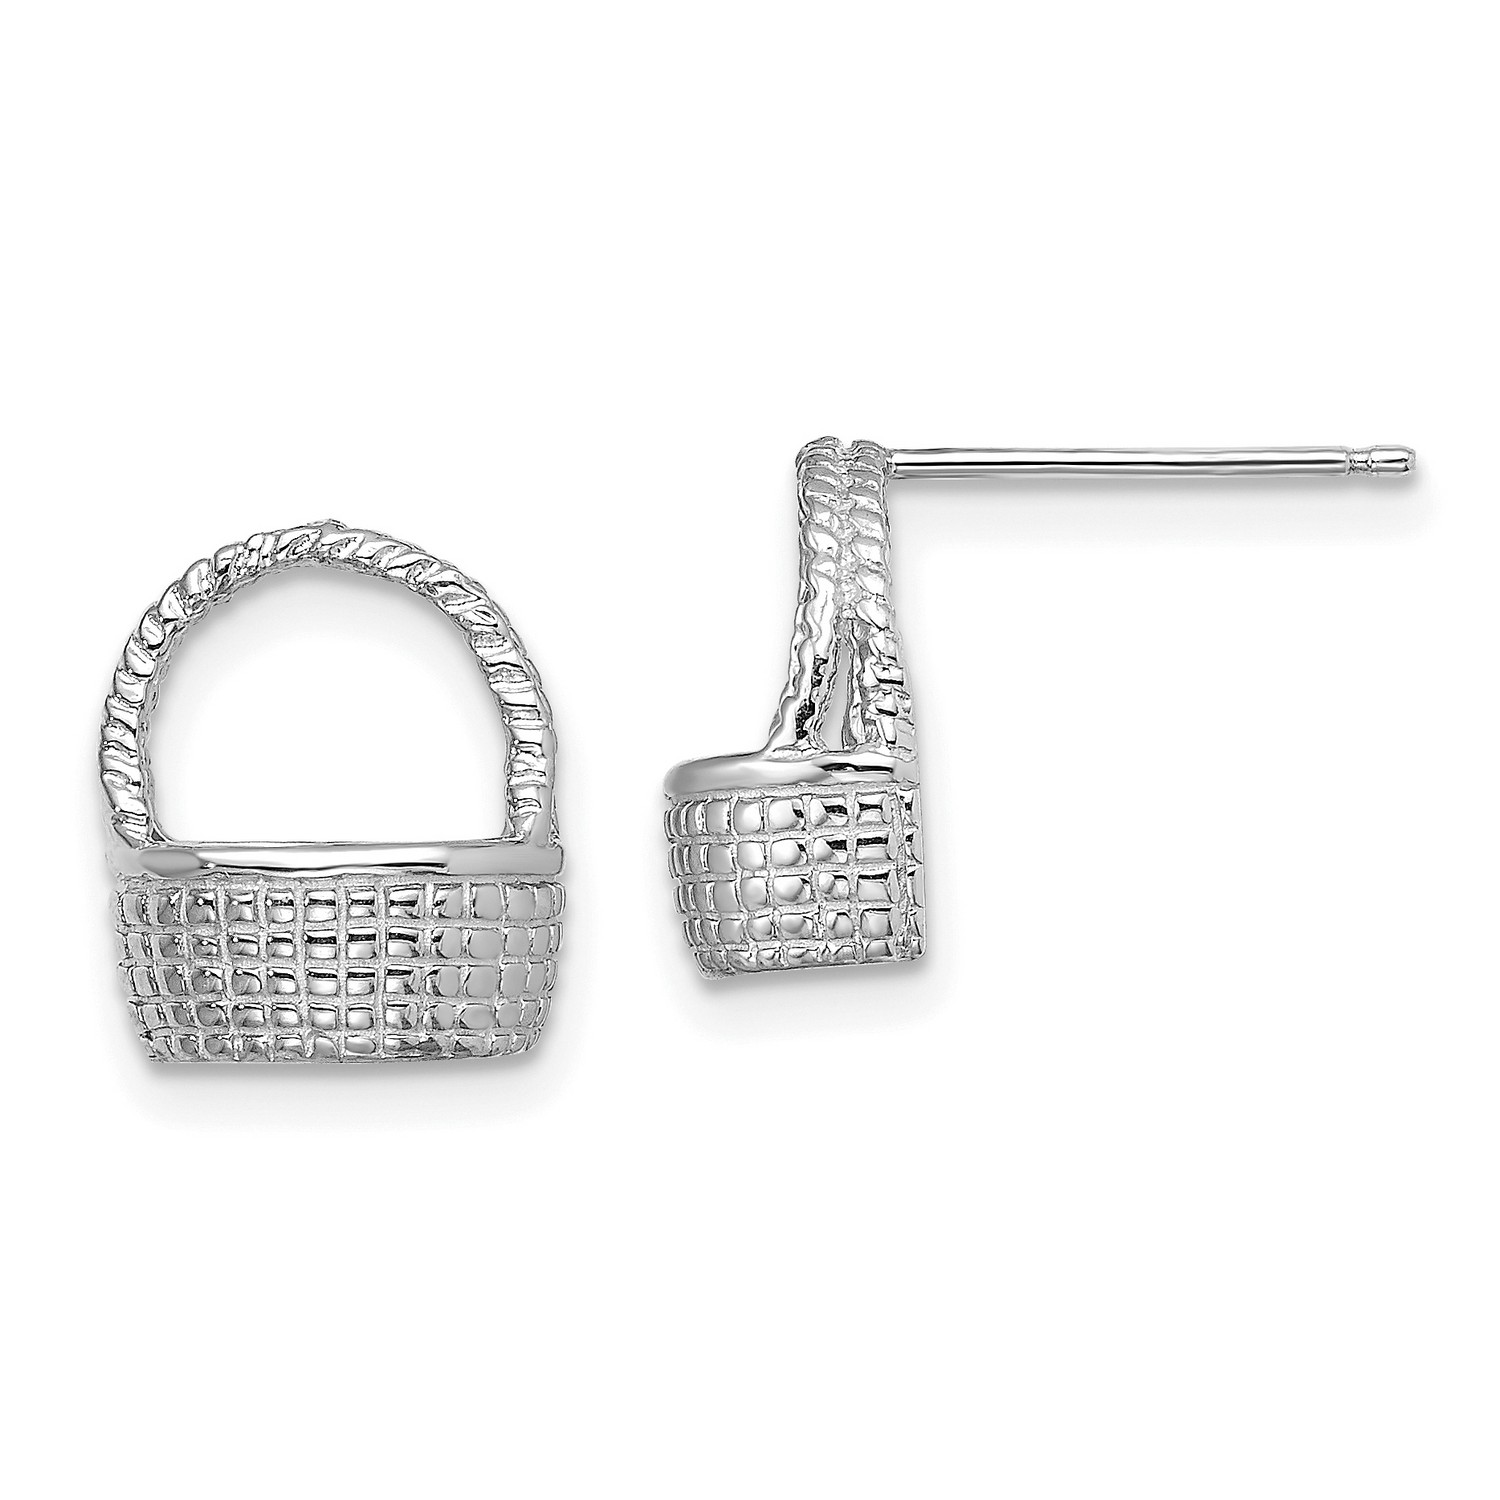 Pre-owned Jewelry Stores Network 14k White Gold Basket Flat Back Post Earrings